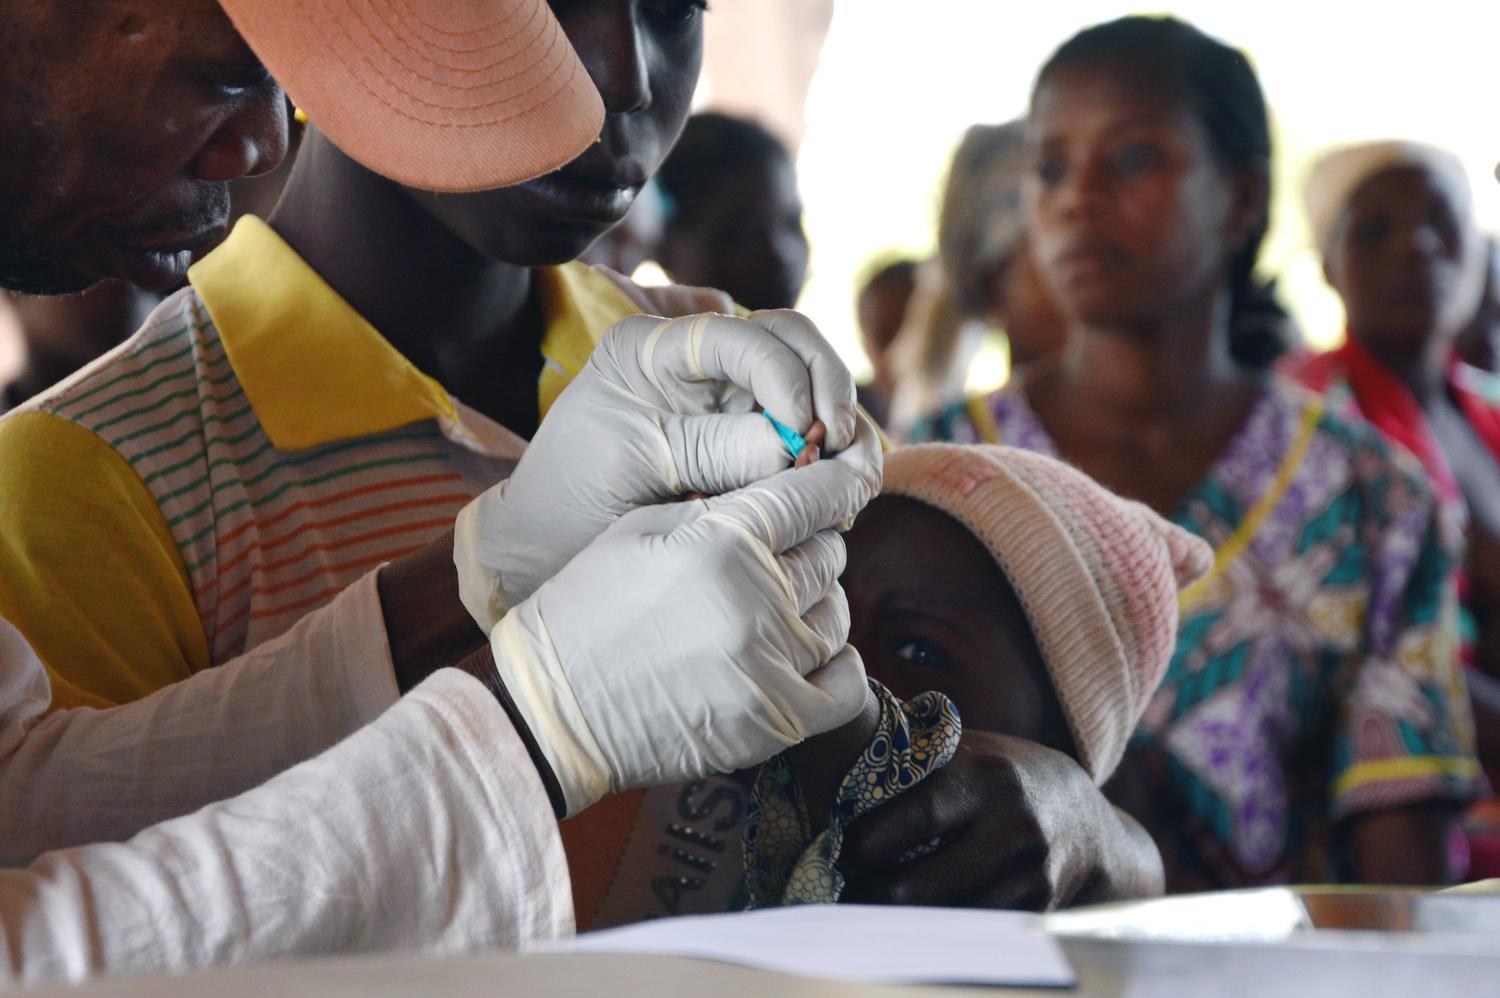 Ten-month-old girl is pricked on the finger for a rapid test to detect malaria at a health facility in Boguila. Central African Republic, February 2019.  